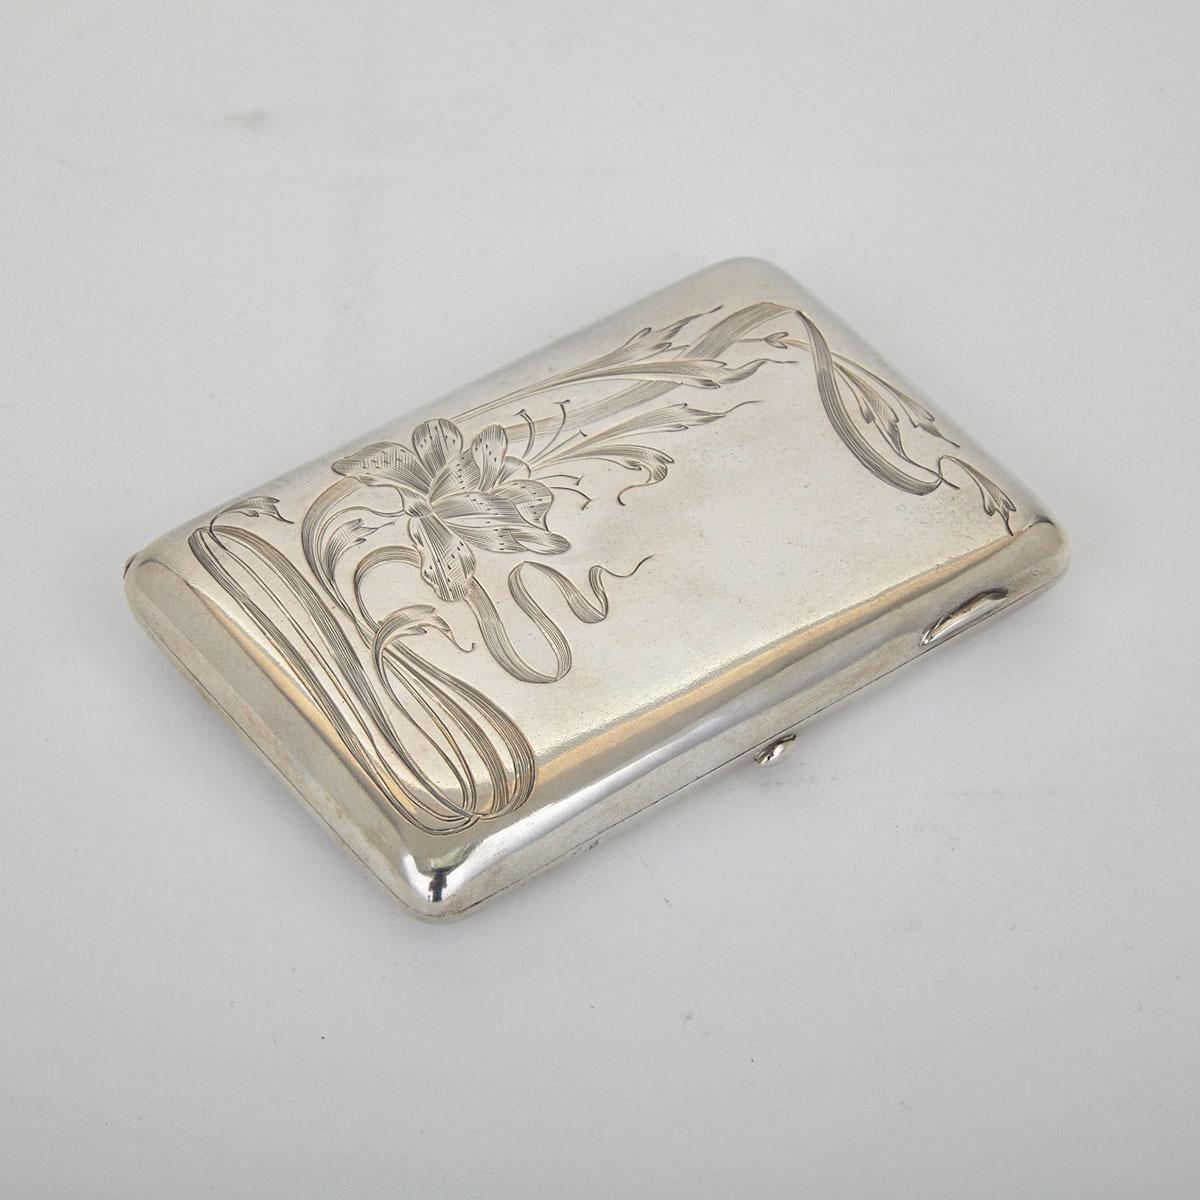 Russian Silver Rectangular Cigarette Case, Moscow, 1896-1901